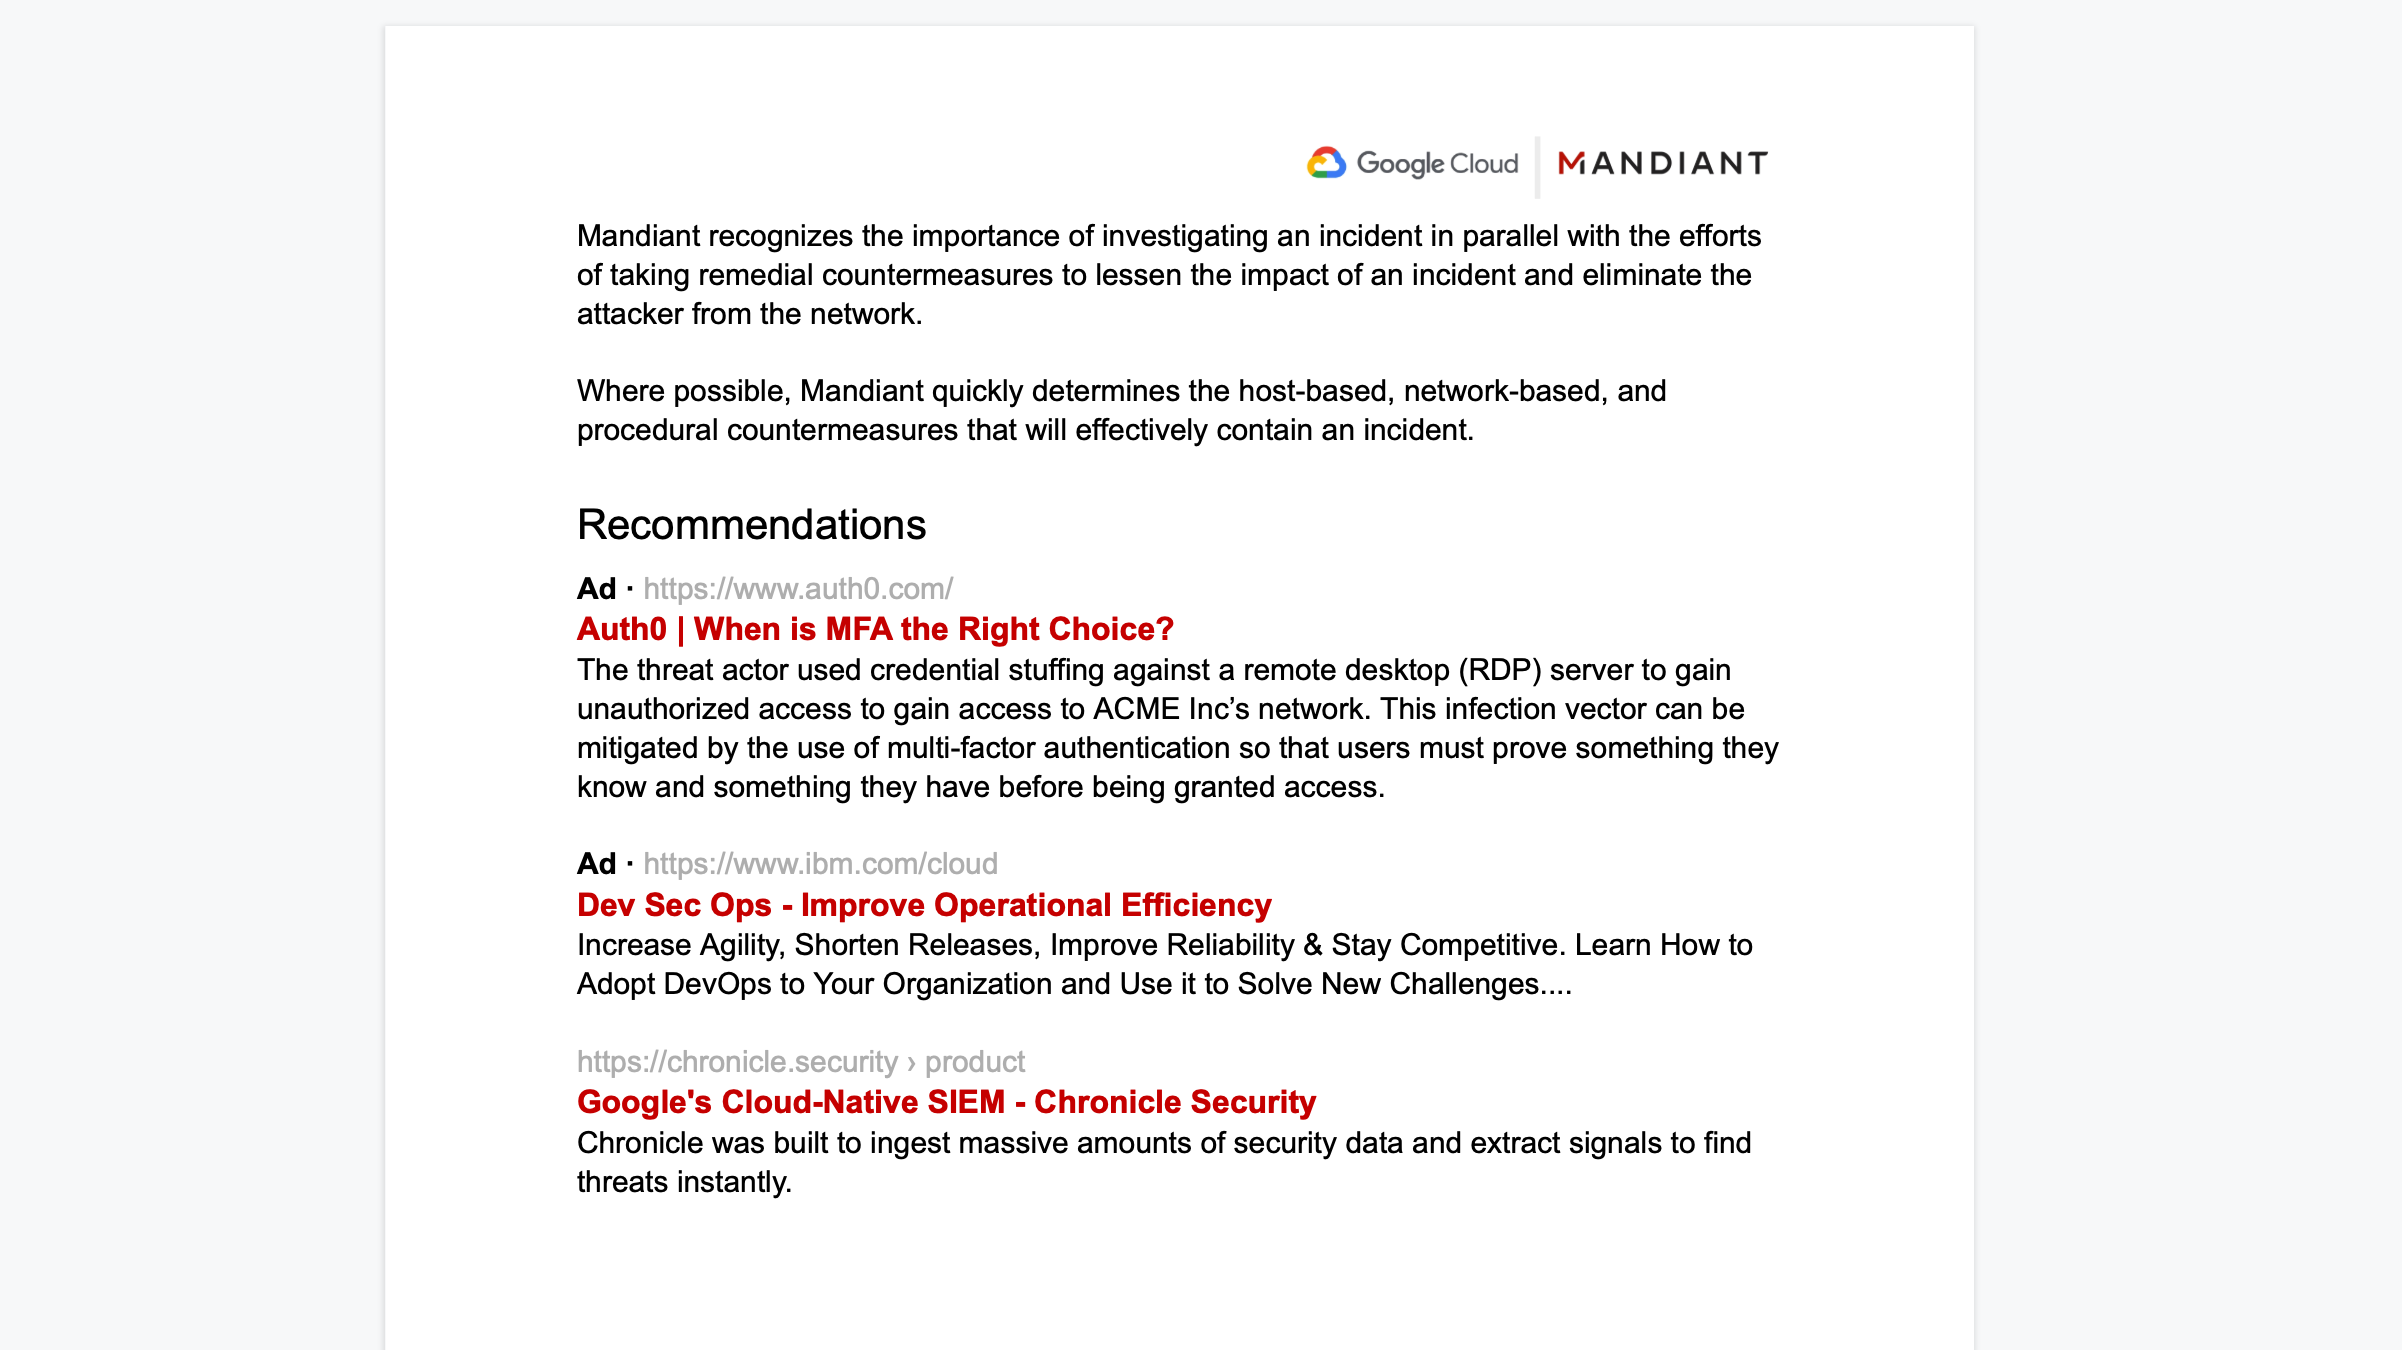 A mock-up of a Mandiant incident response report containing Google Search style promoted links as findings and recommendations (source: @RTO)